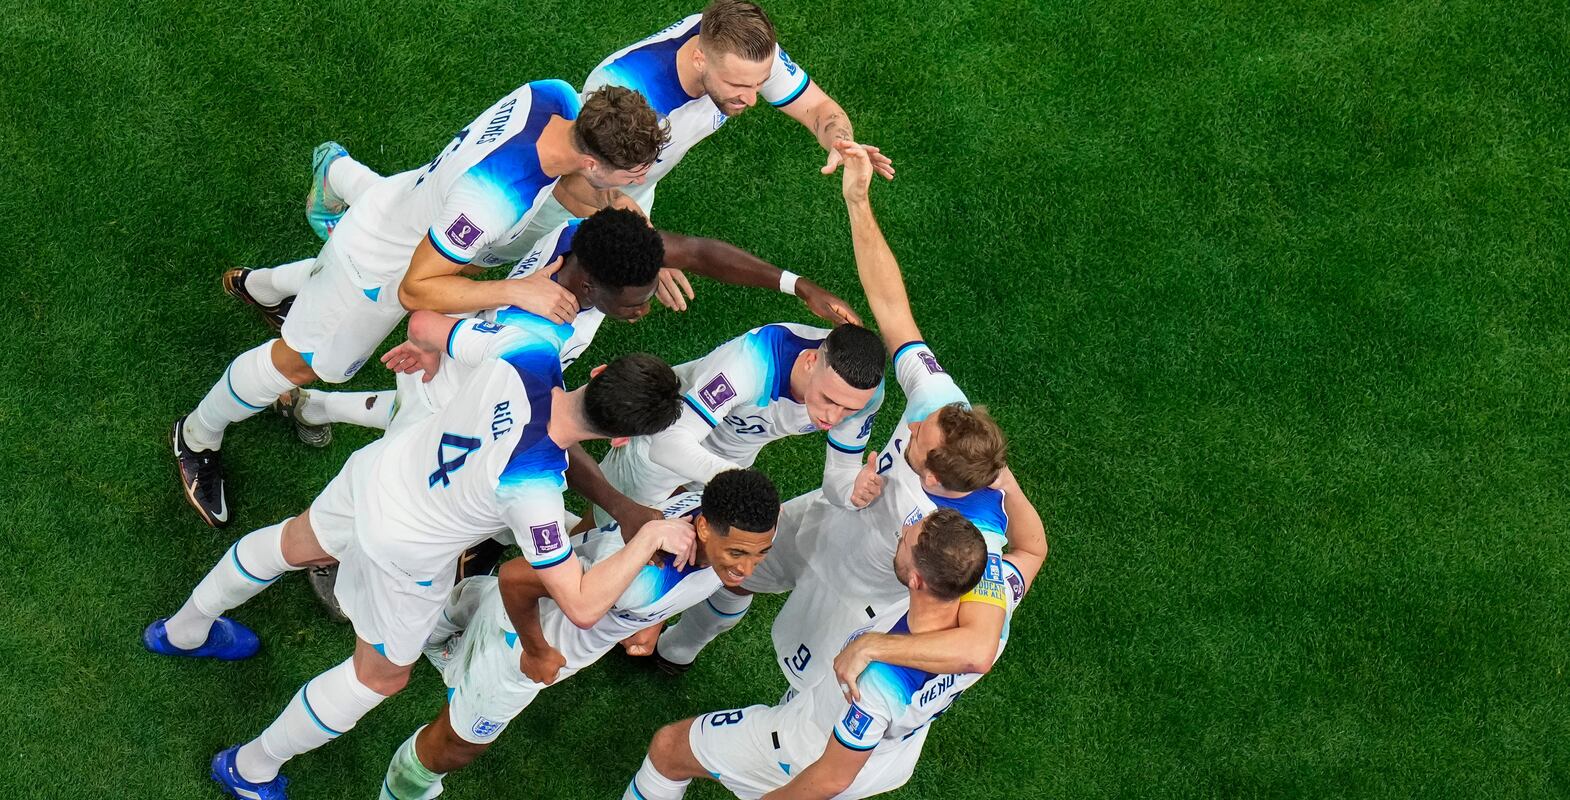 England's players celebrate after scoring the opening goal of their team against Senegal during the World Cup round of 16 soccer match between England and Senegal, at the Al Bayt Stadium in Al Khor, Qatar, on Sunday, Dec.  4, 2022.  (AP Photo / Petr David Josek)